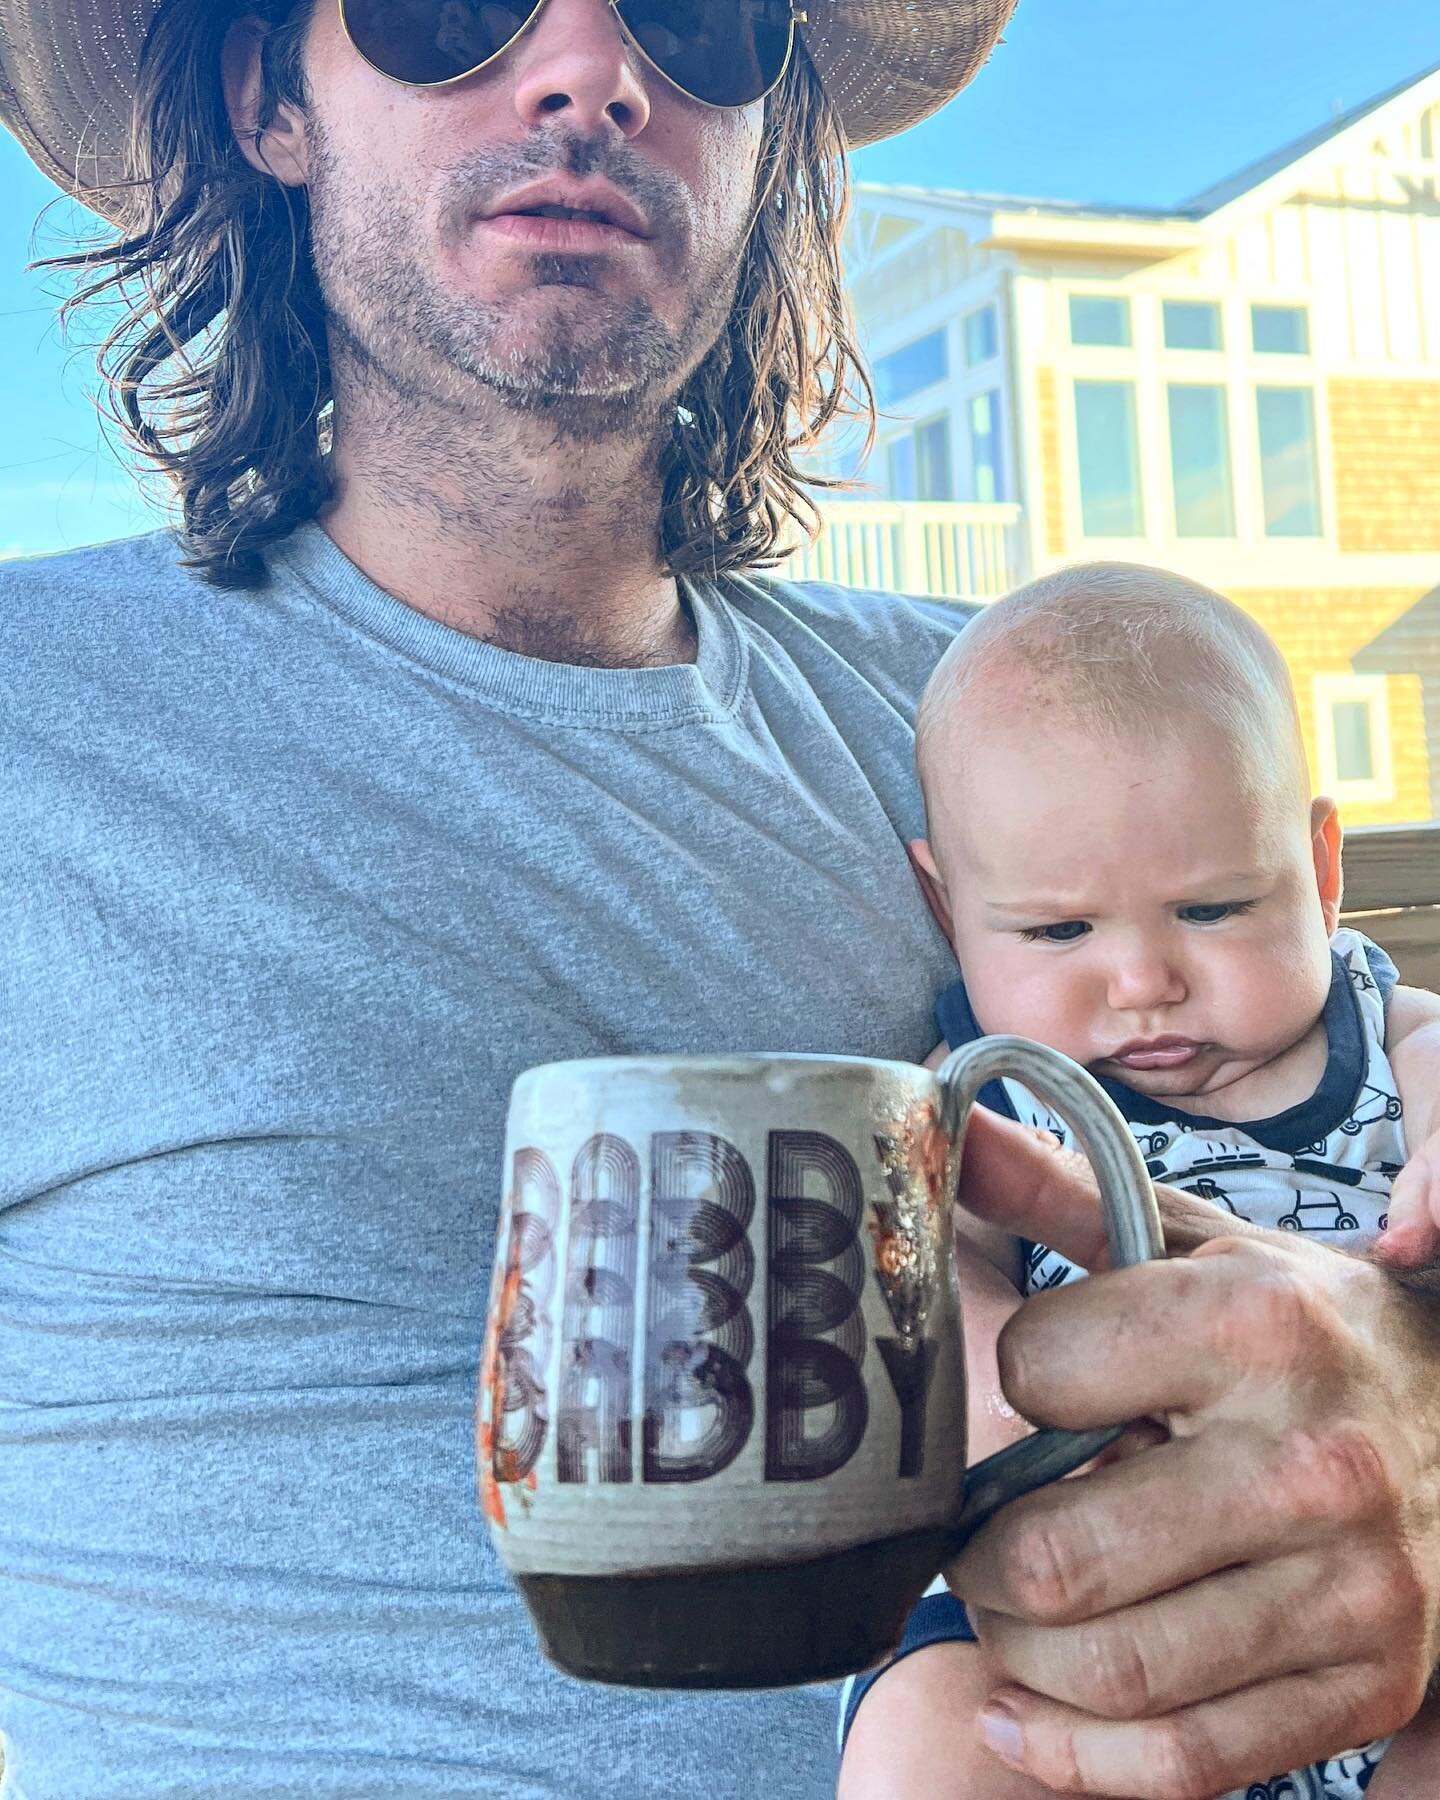 Daddy Mug doing Dad things!! If I&rsquo;m bringing out drinks in handmade wares (maybe on vacation) you should know a photo moment may be coming&hellip;
.
In stock in case someone is being especially dad-tastic ⭐️
.
#potterylife #pottery #mug #mugs #